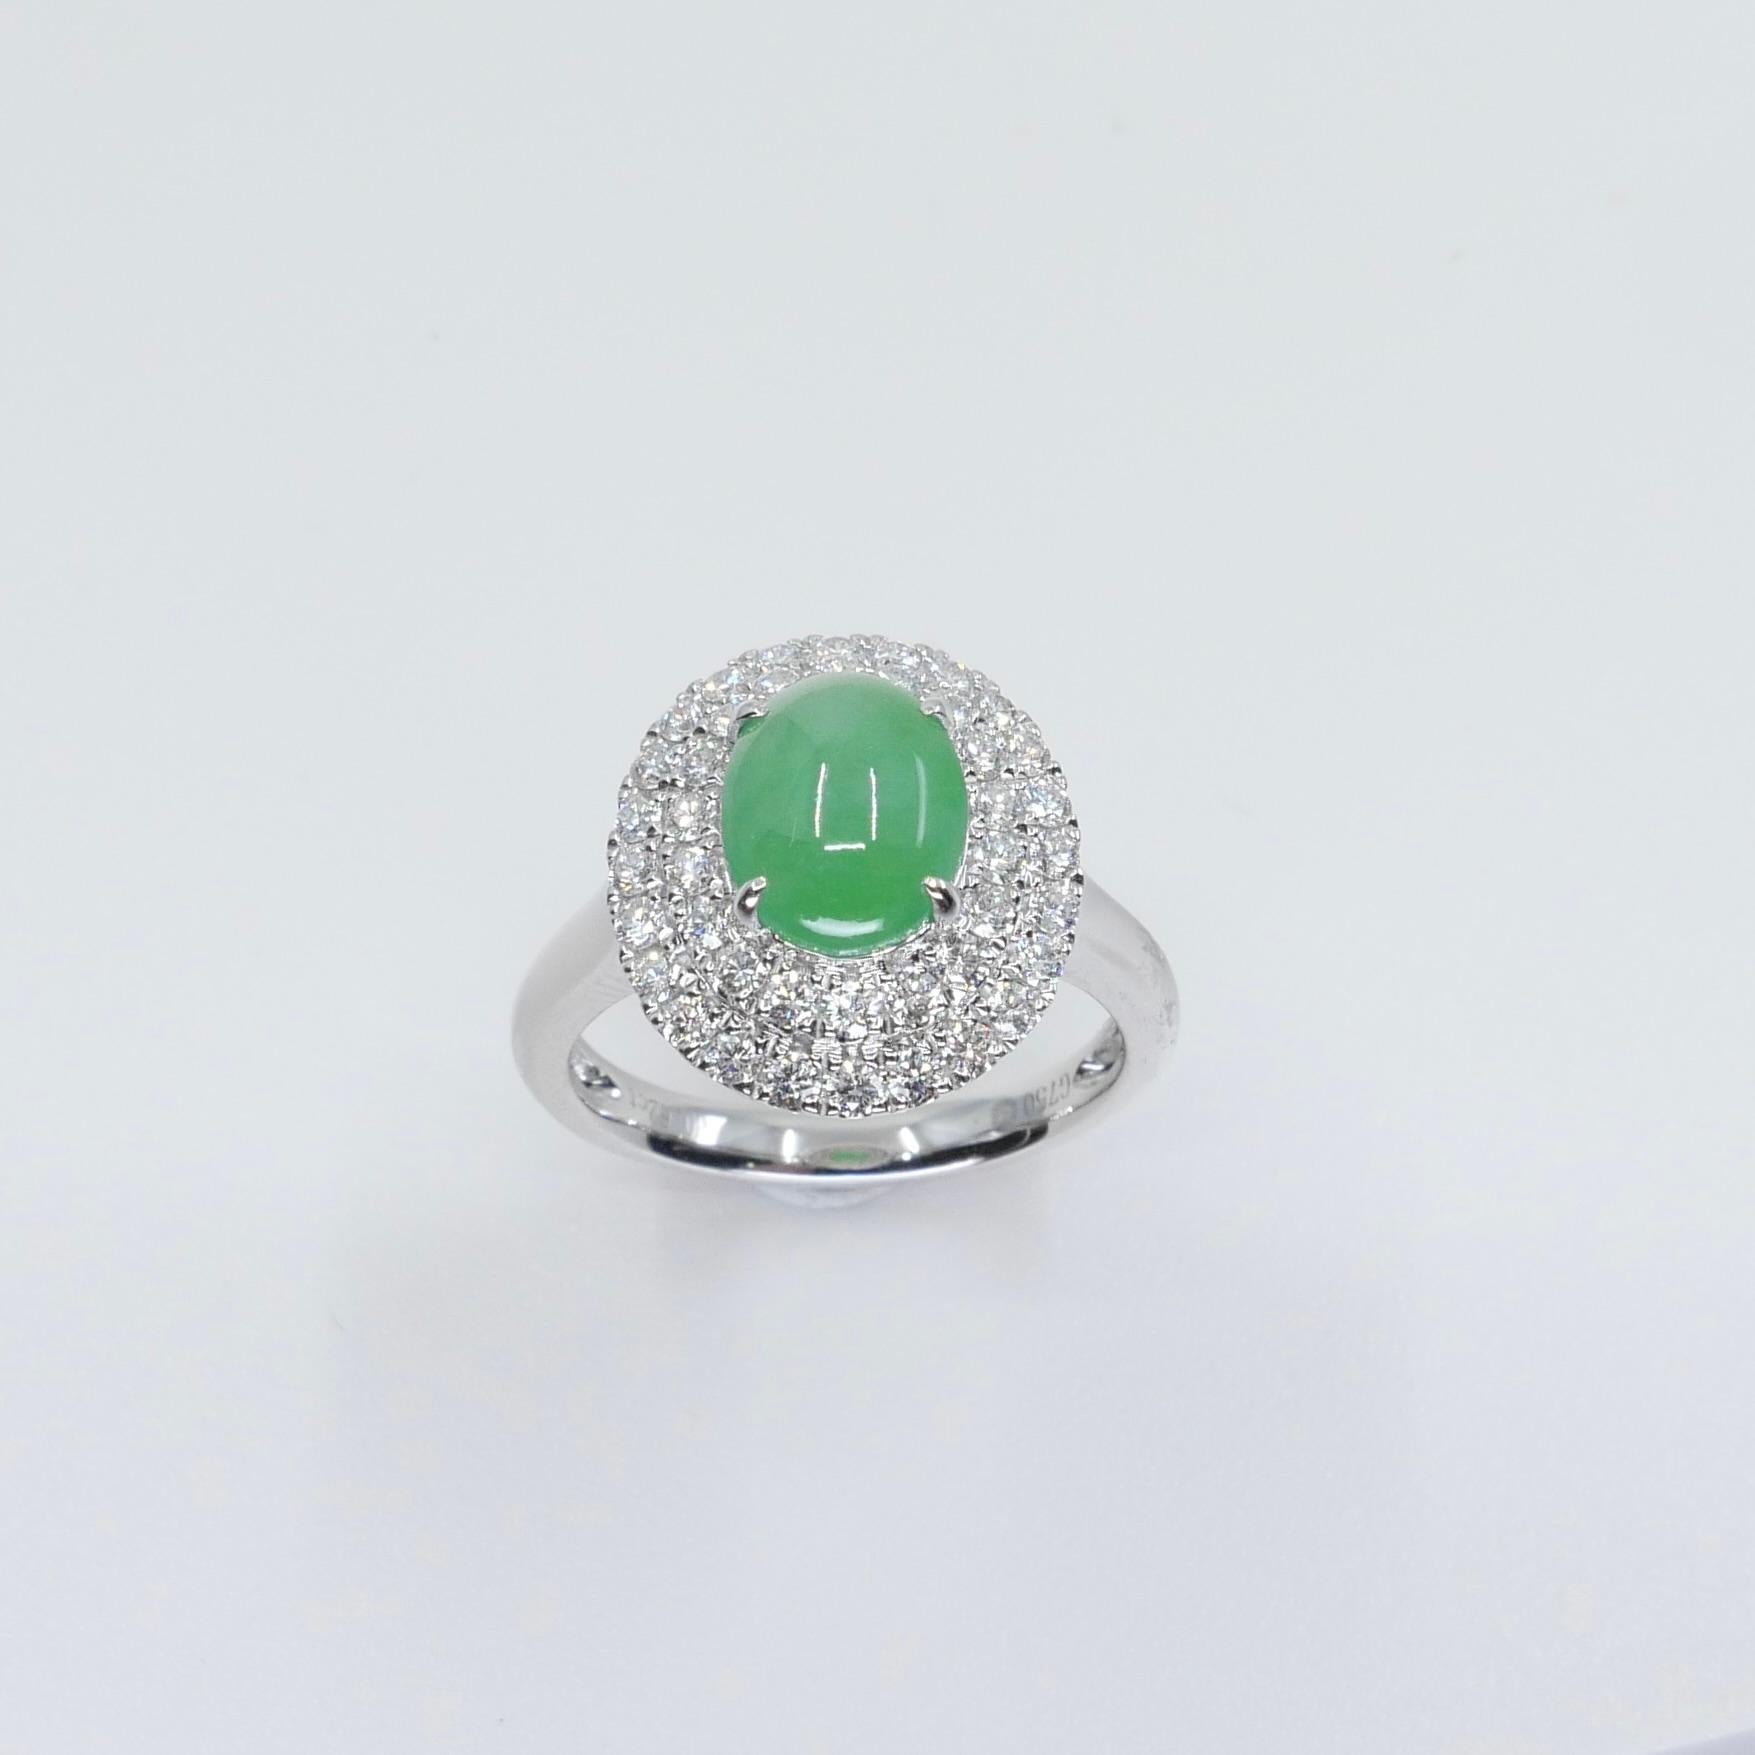 Certified 1.59 Carat Natural Jade & Diamond Cocktail Ring, Apple Green Color For Sale 5